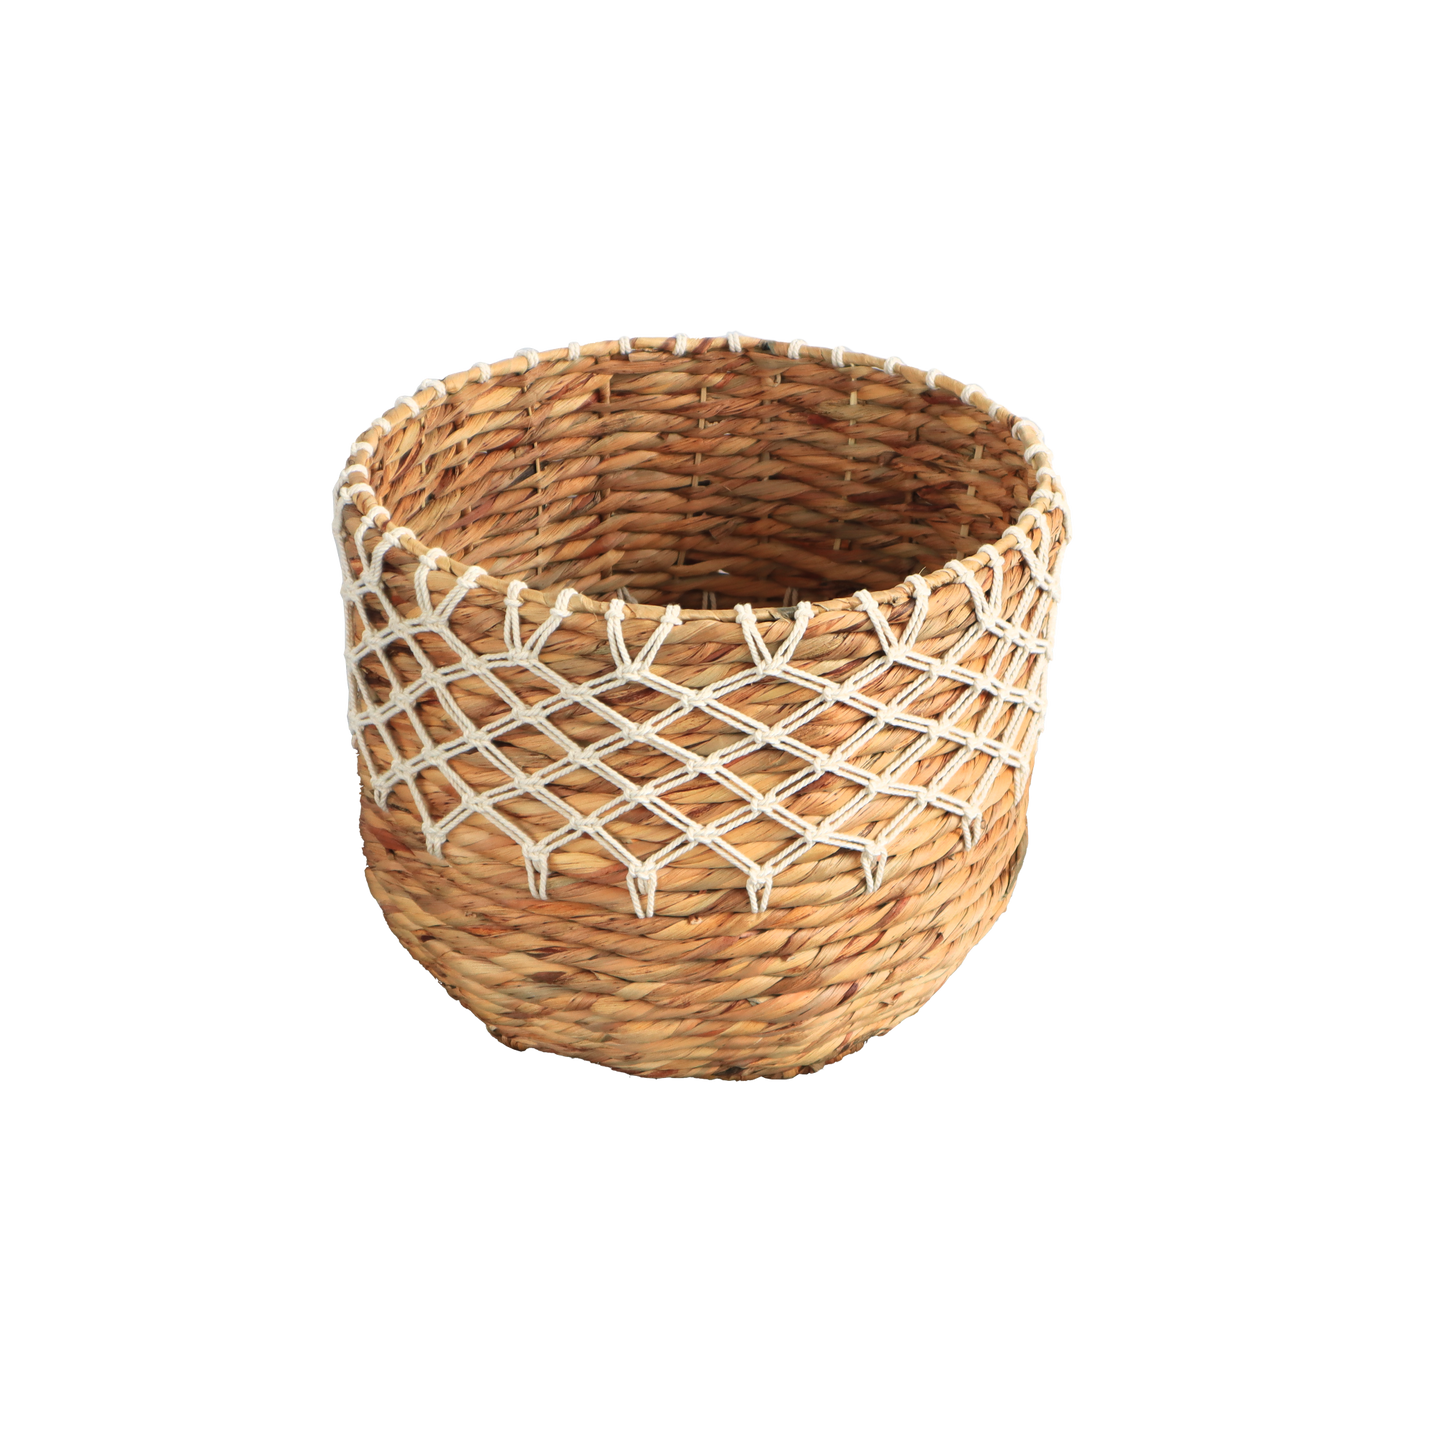 Eden Grace Set of 3 Handwoven Wicker Baskets, Twisted Weave with Macrame Accent - Round, Artisan Craftsmanship for Stylish Organization